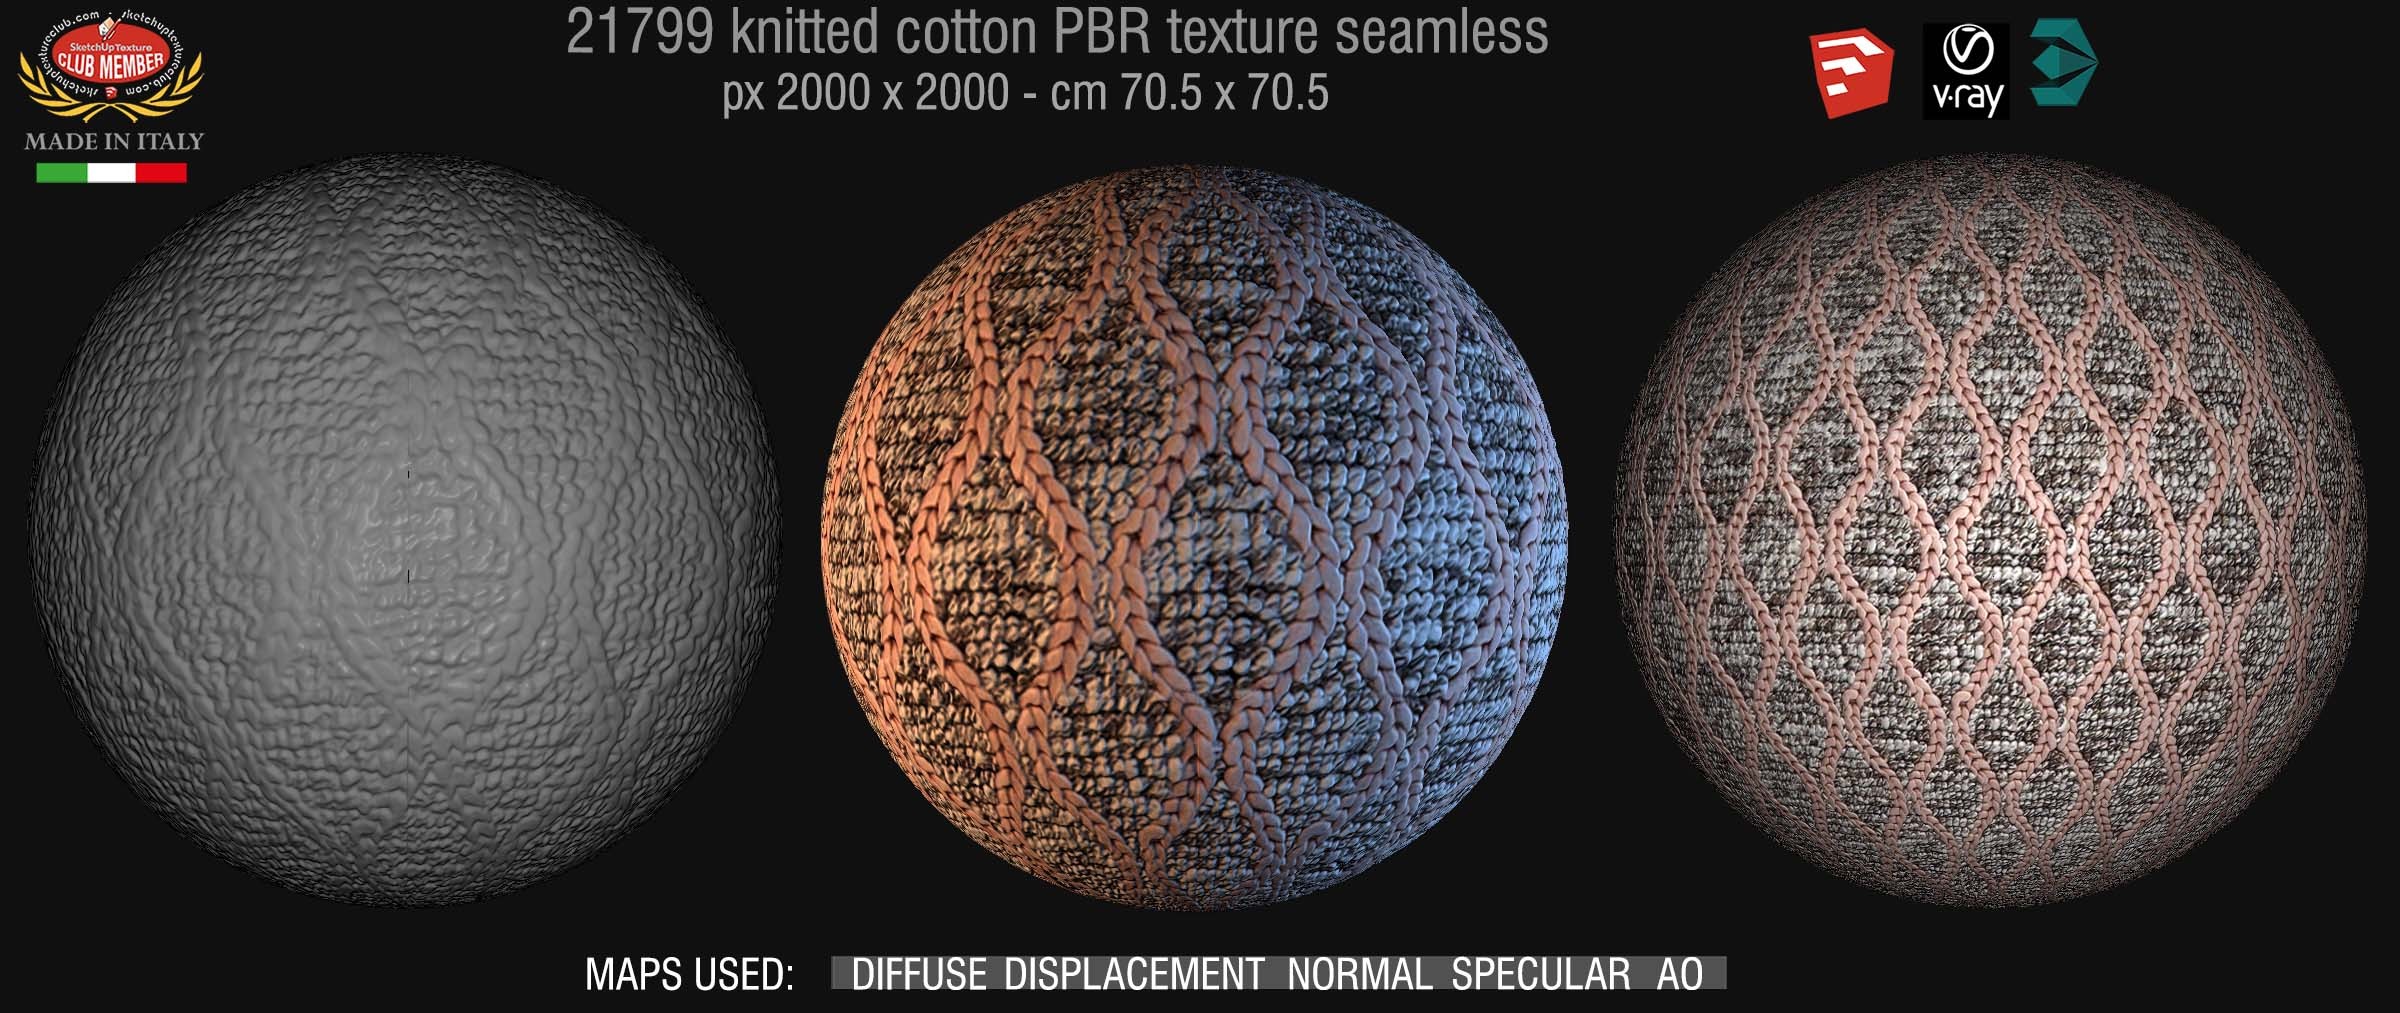 knitted cotton PBR textures seamless 21799